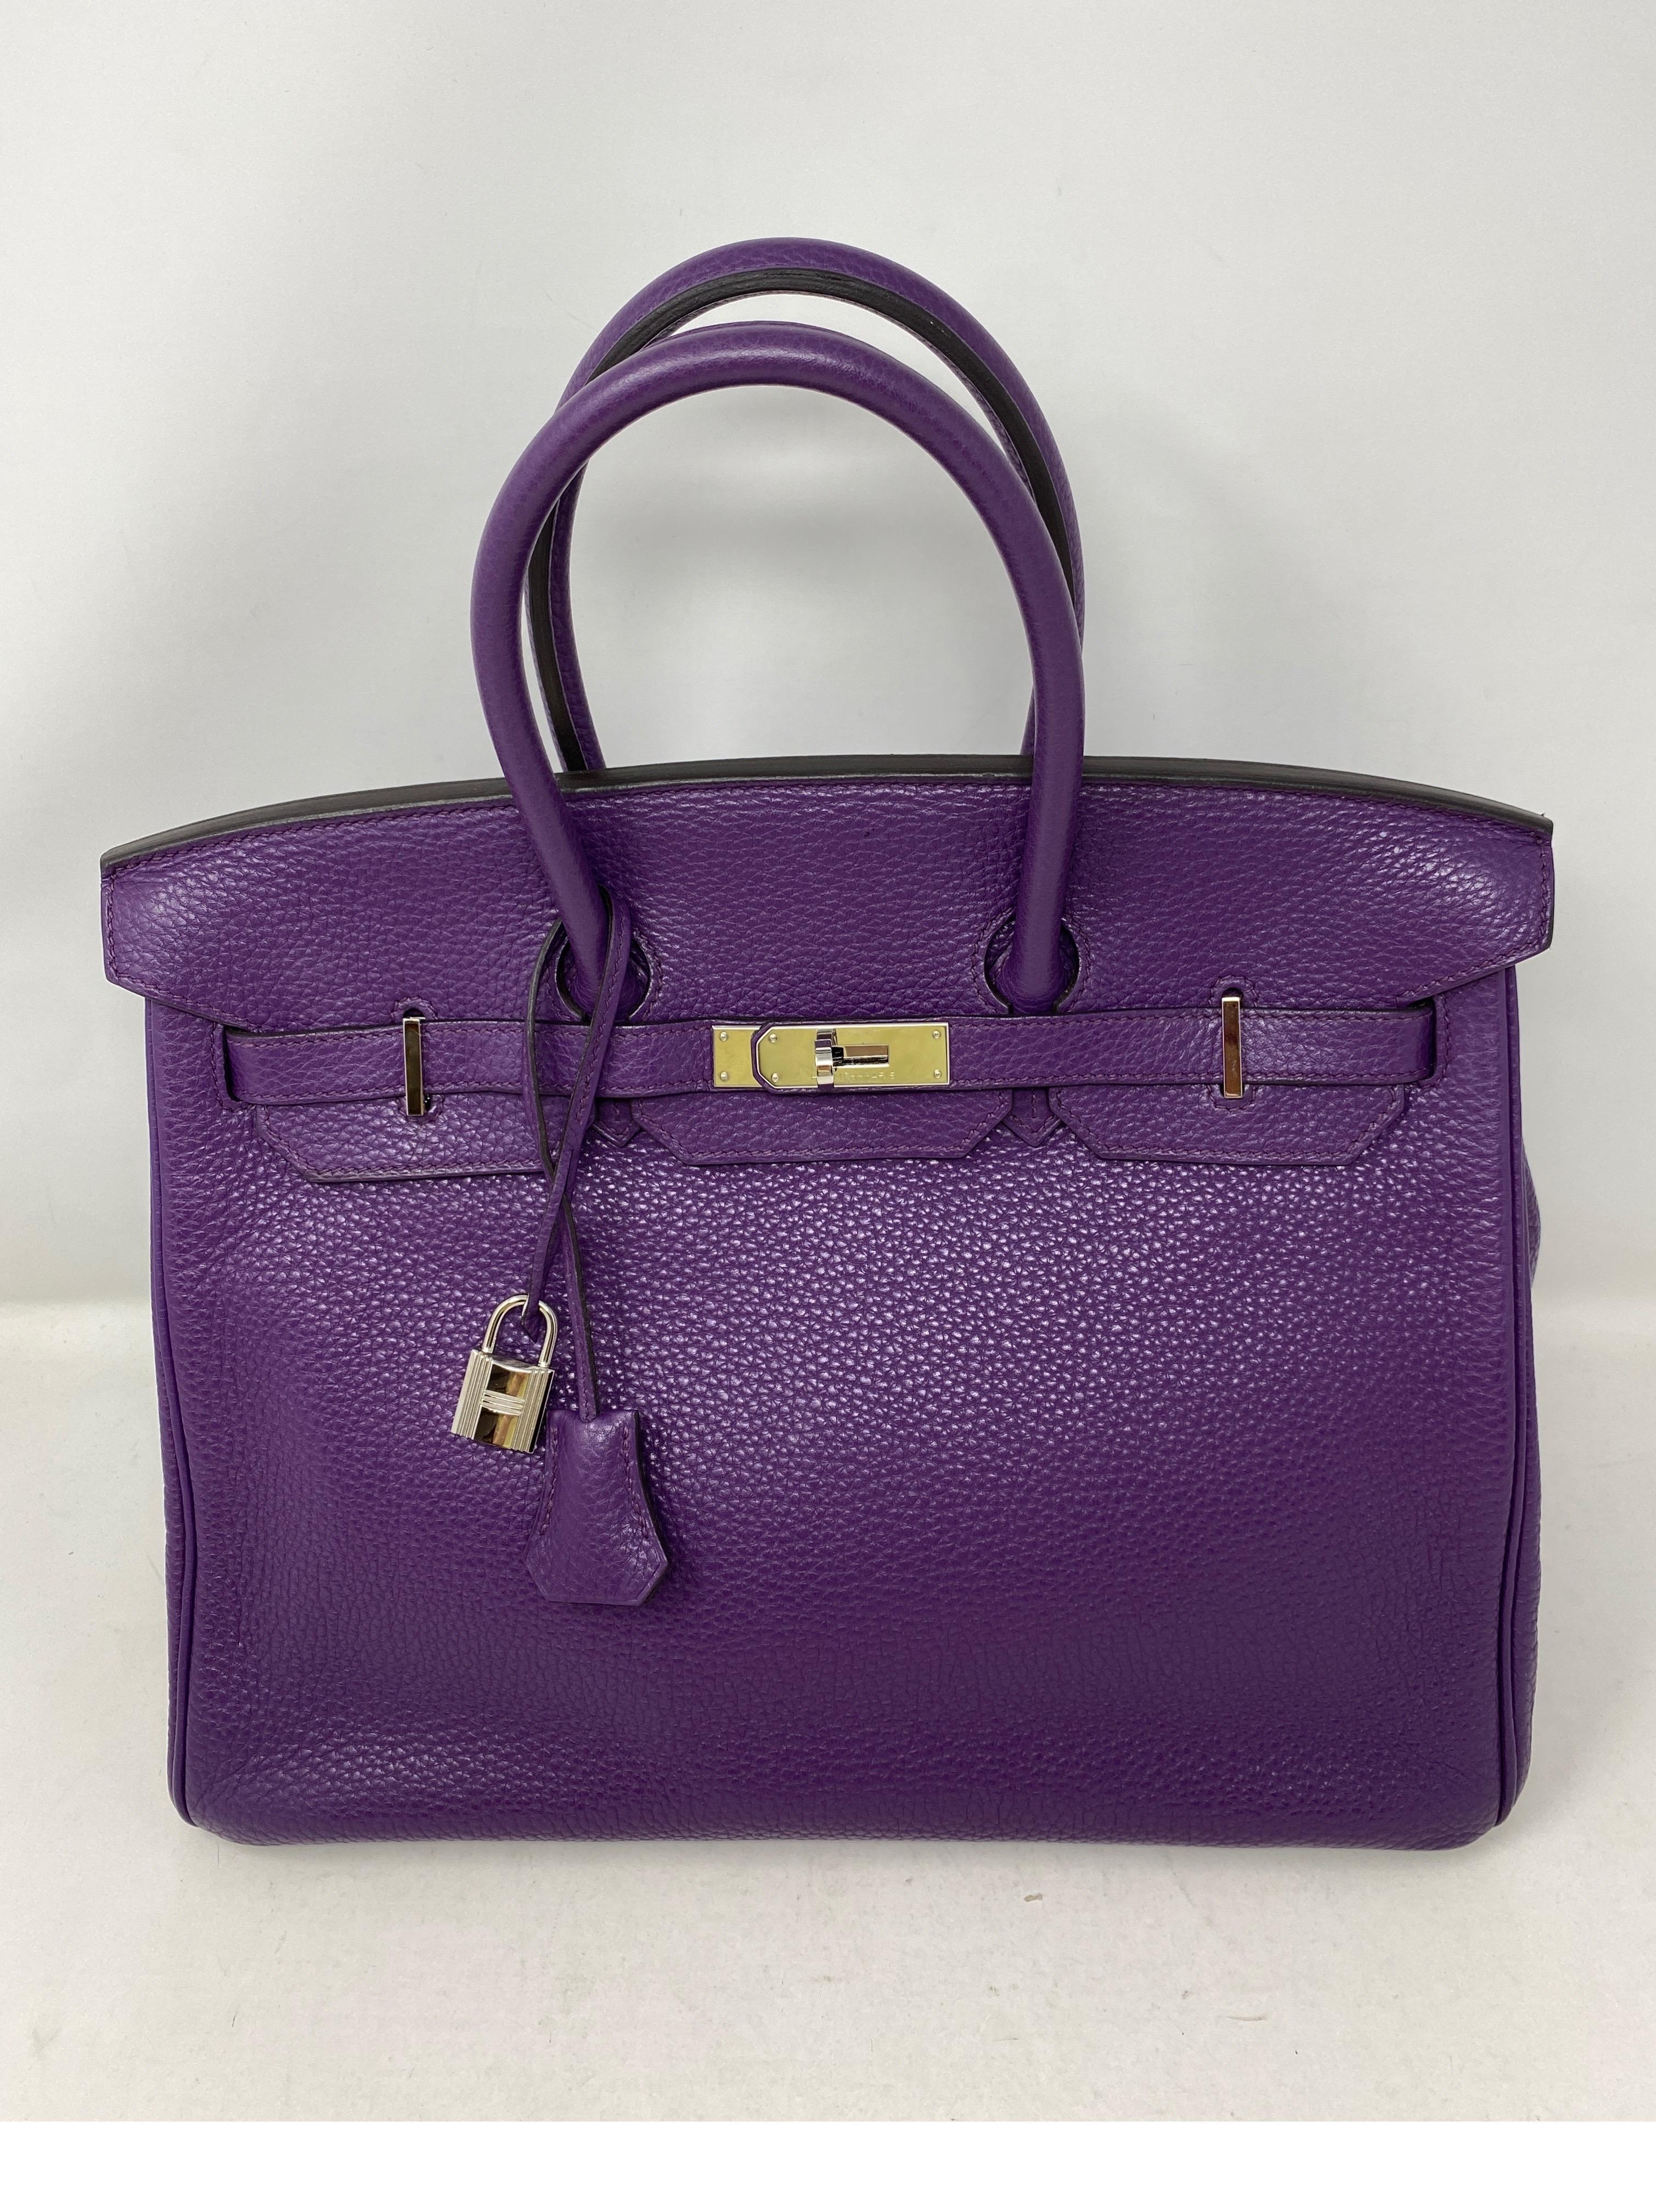 Hermes Ultraviolet Birkin 35 Bag. Palladium hardware. From 2012. P stamp. Excellent condition. Still has plastic on hardware. Vibrant purple color. Includes clochette, lock, keys, rain jacket and dust cover. Includes authenticity certificate.